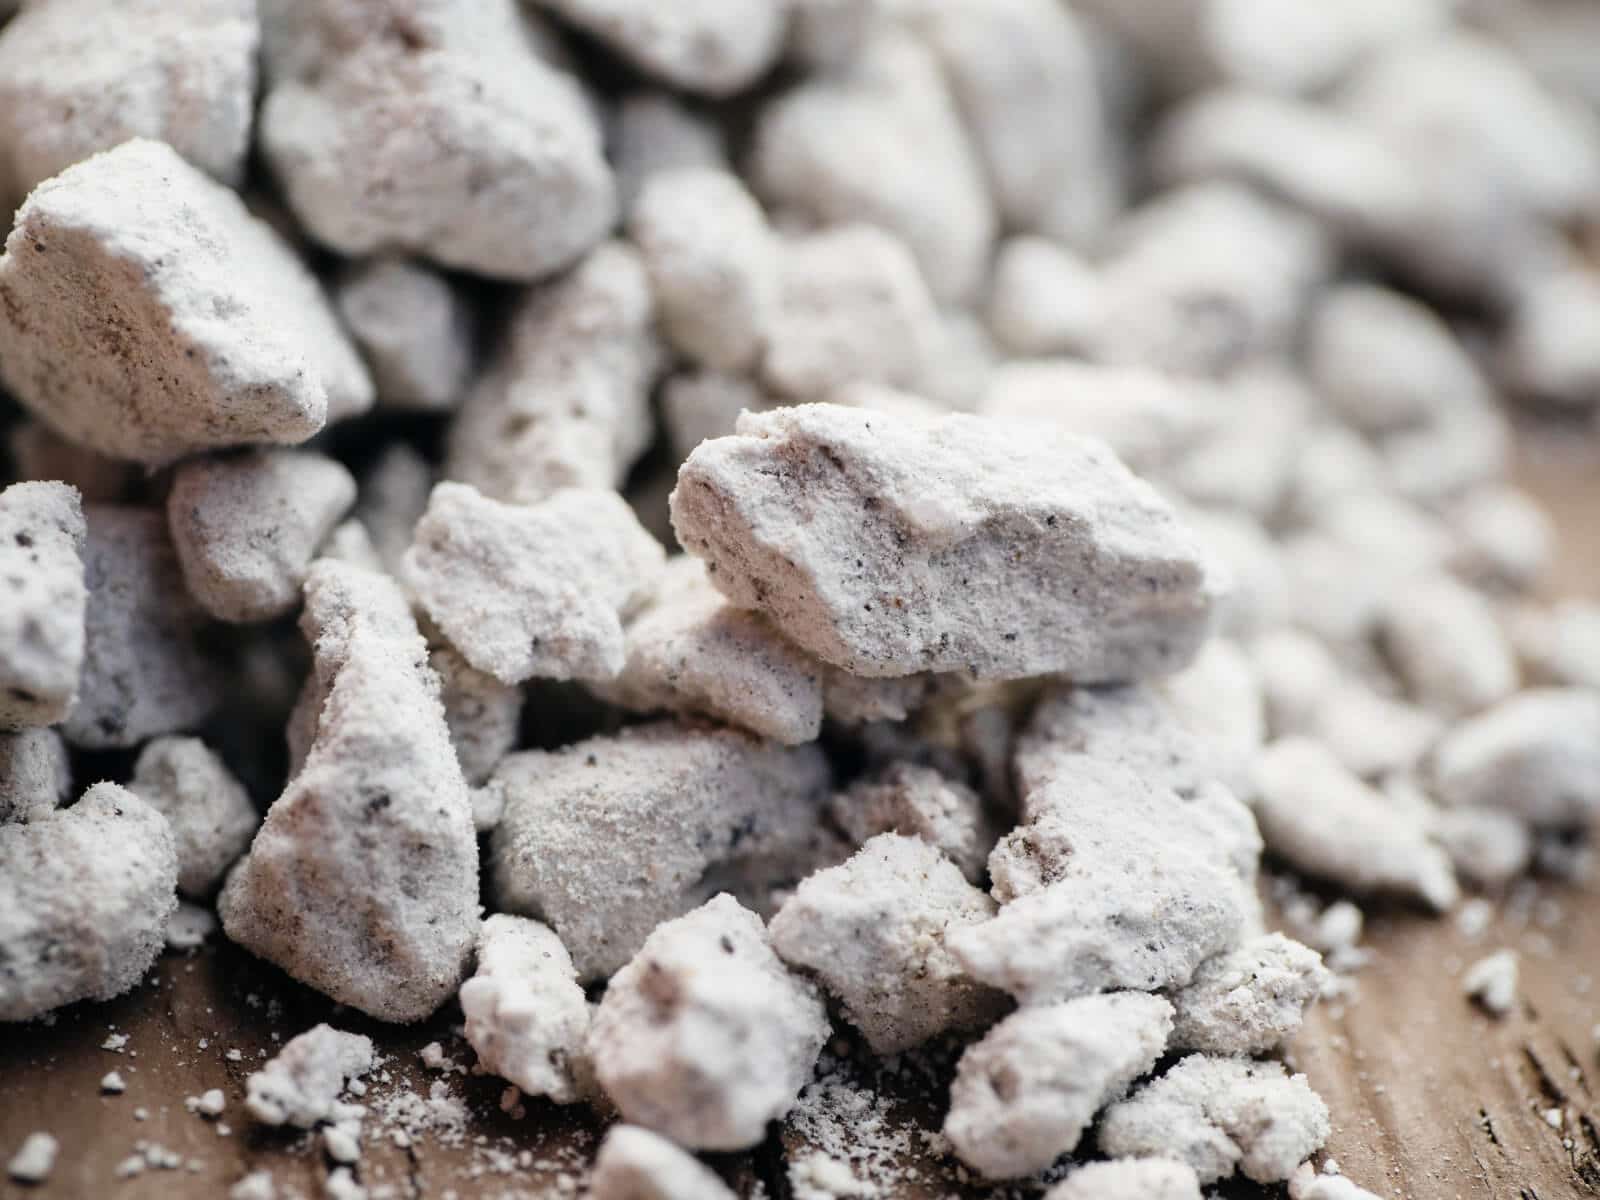 Perlite is a porous volcanic rock used in gardening